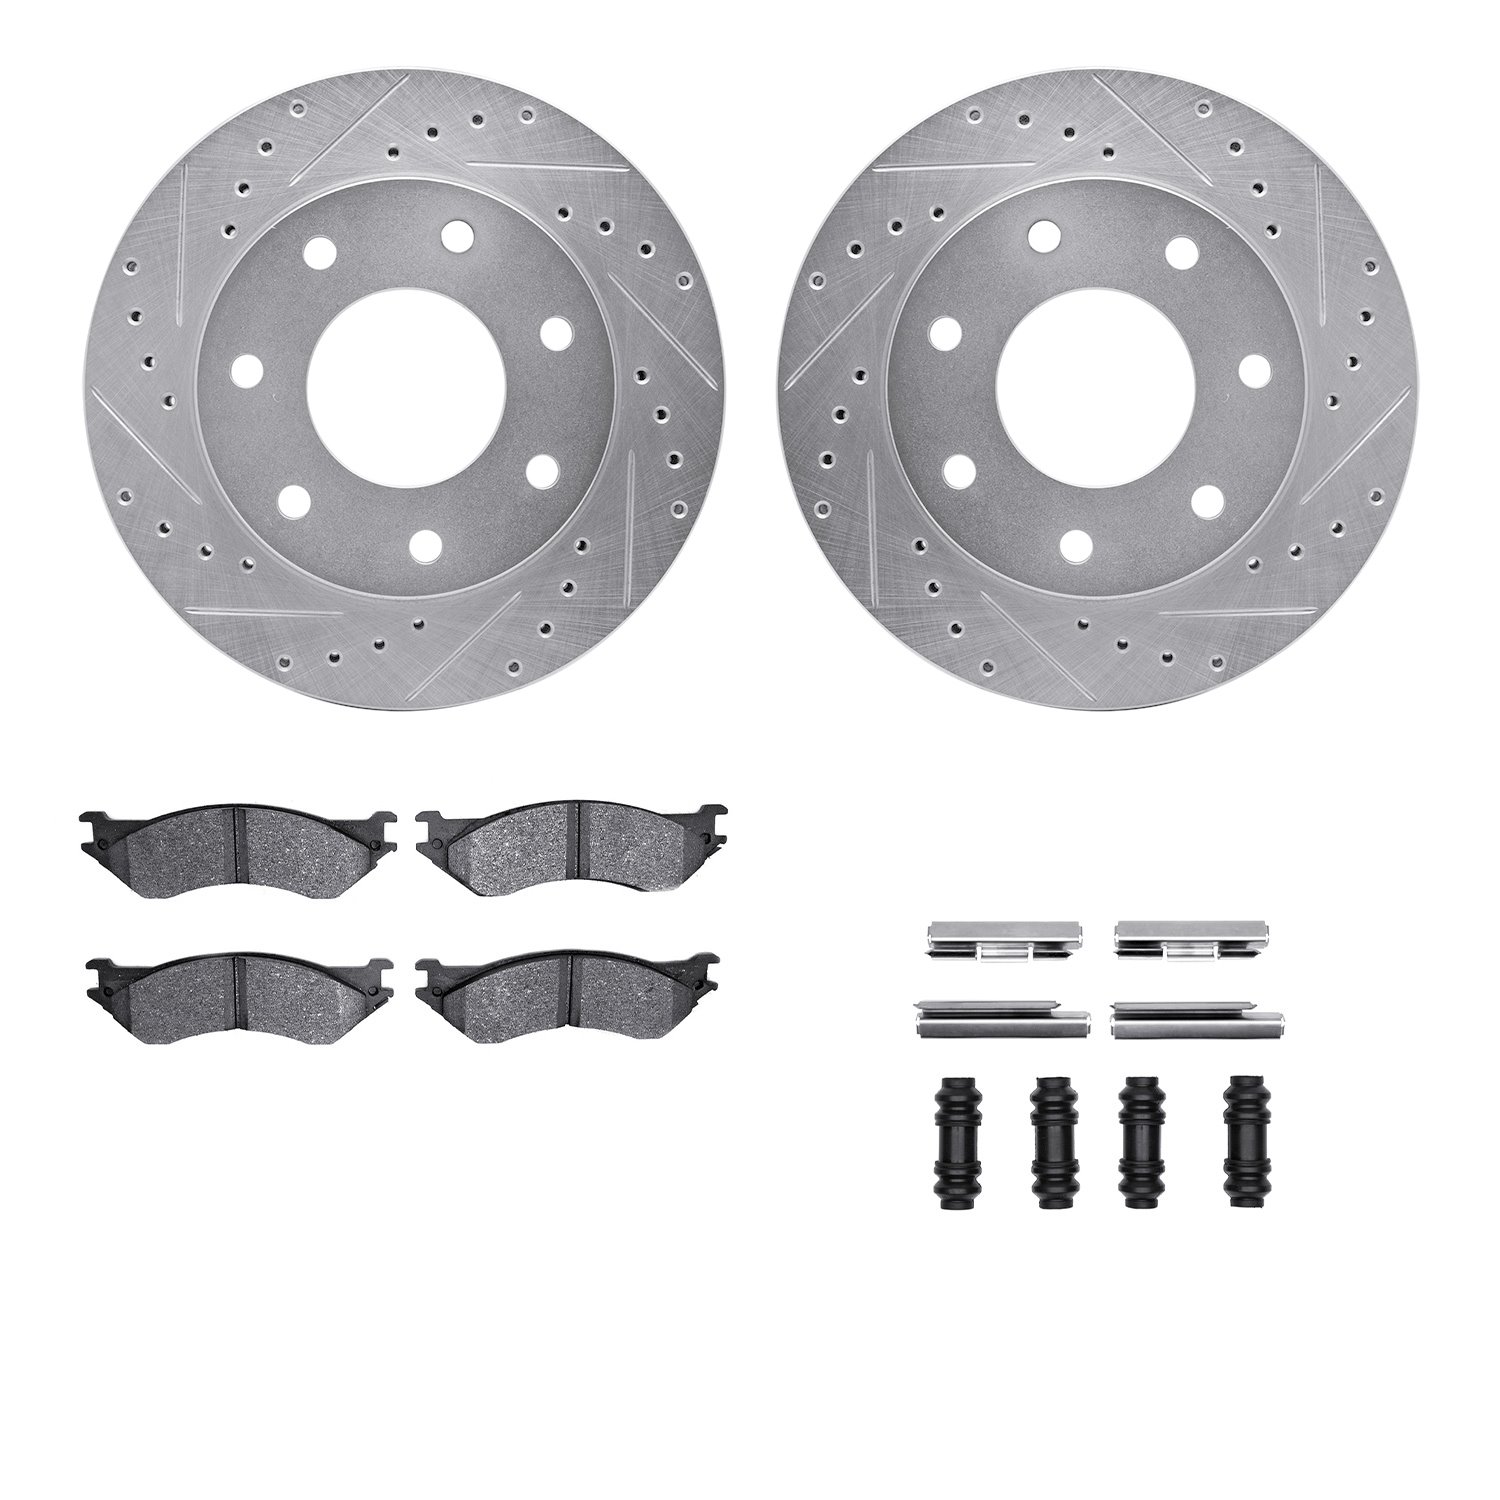 7412-54038 Drilled/Slotted Brake Rotors with Ultimate-Duty Brake Pads Kit & Hardware [Silver], 1997-2004 Ford/Lincoln/Mercury/Ma